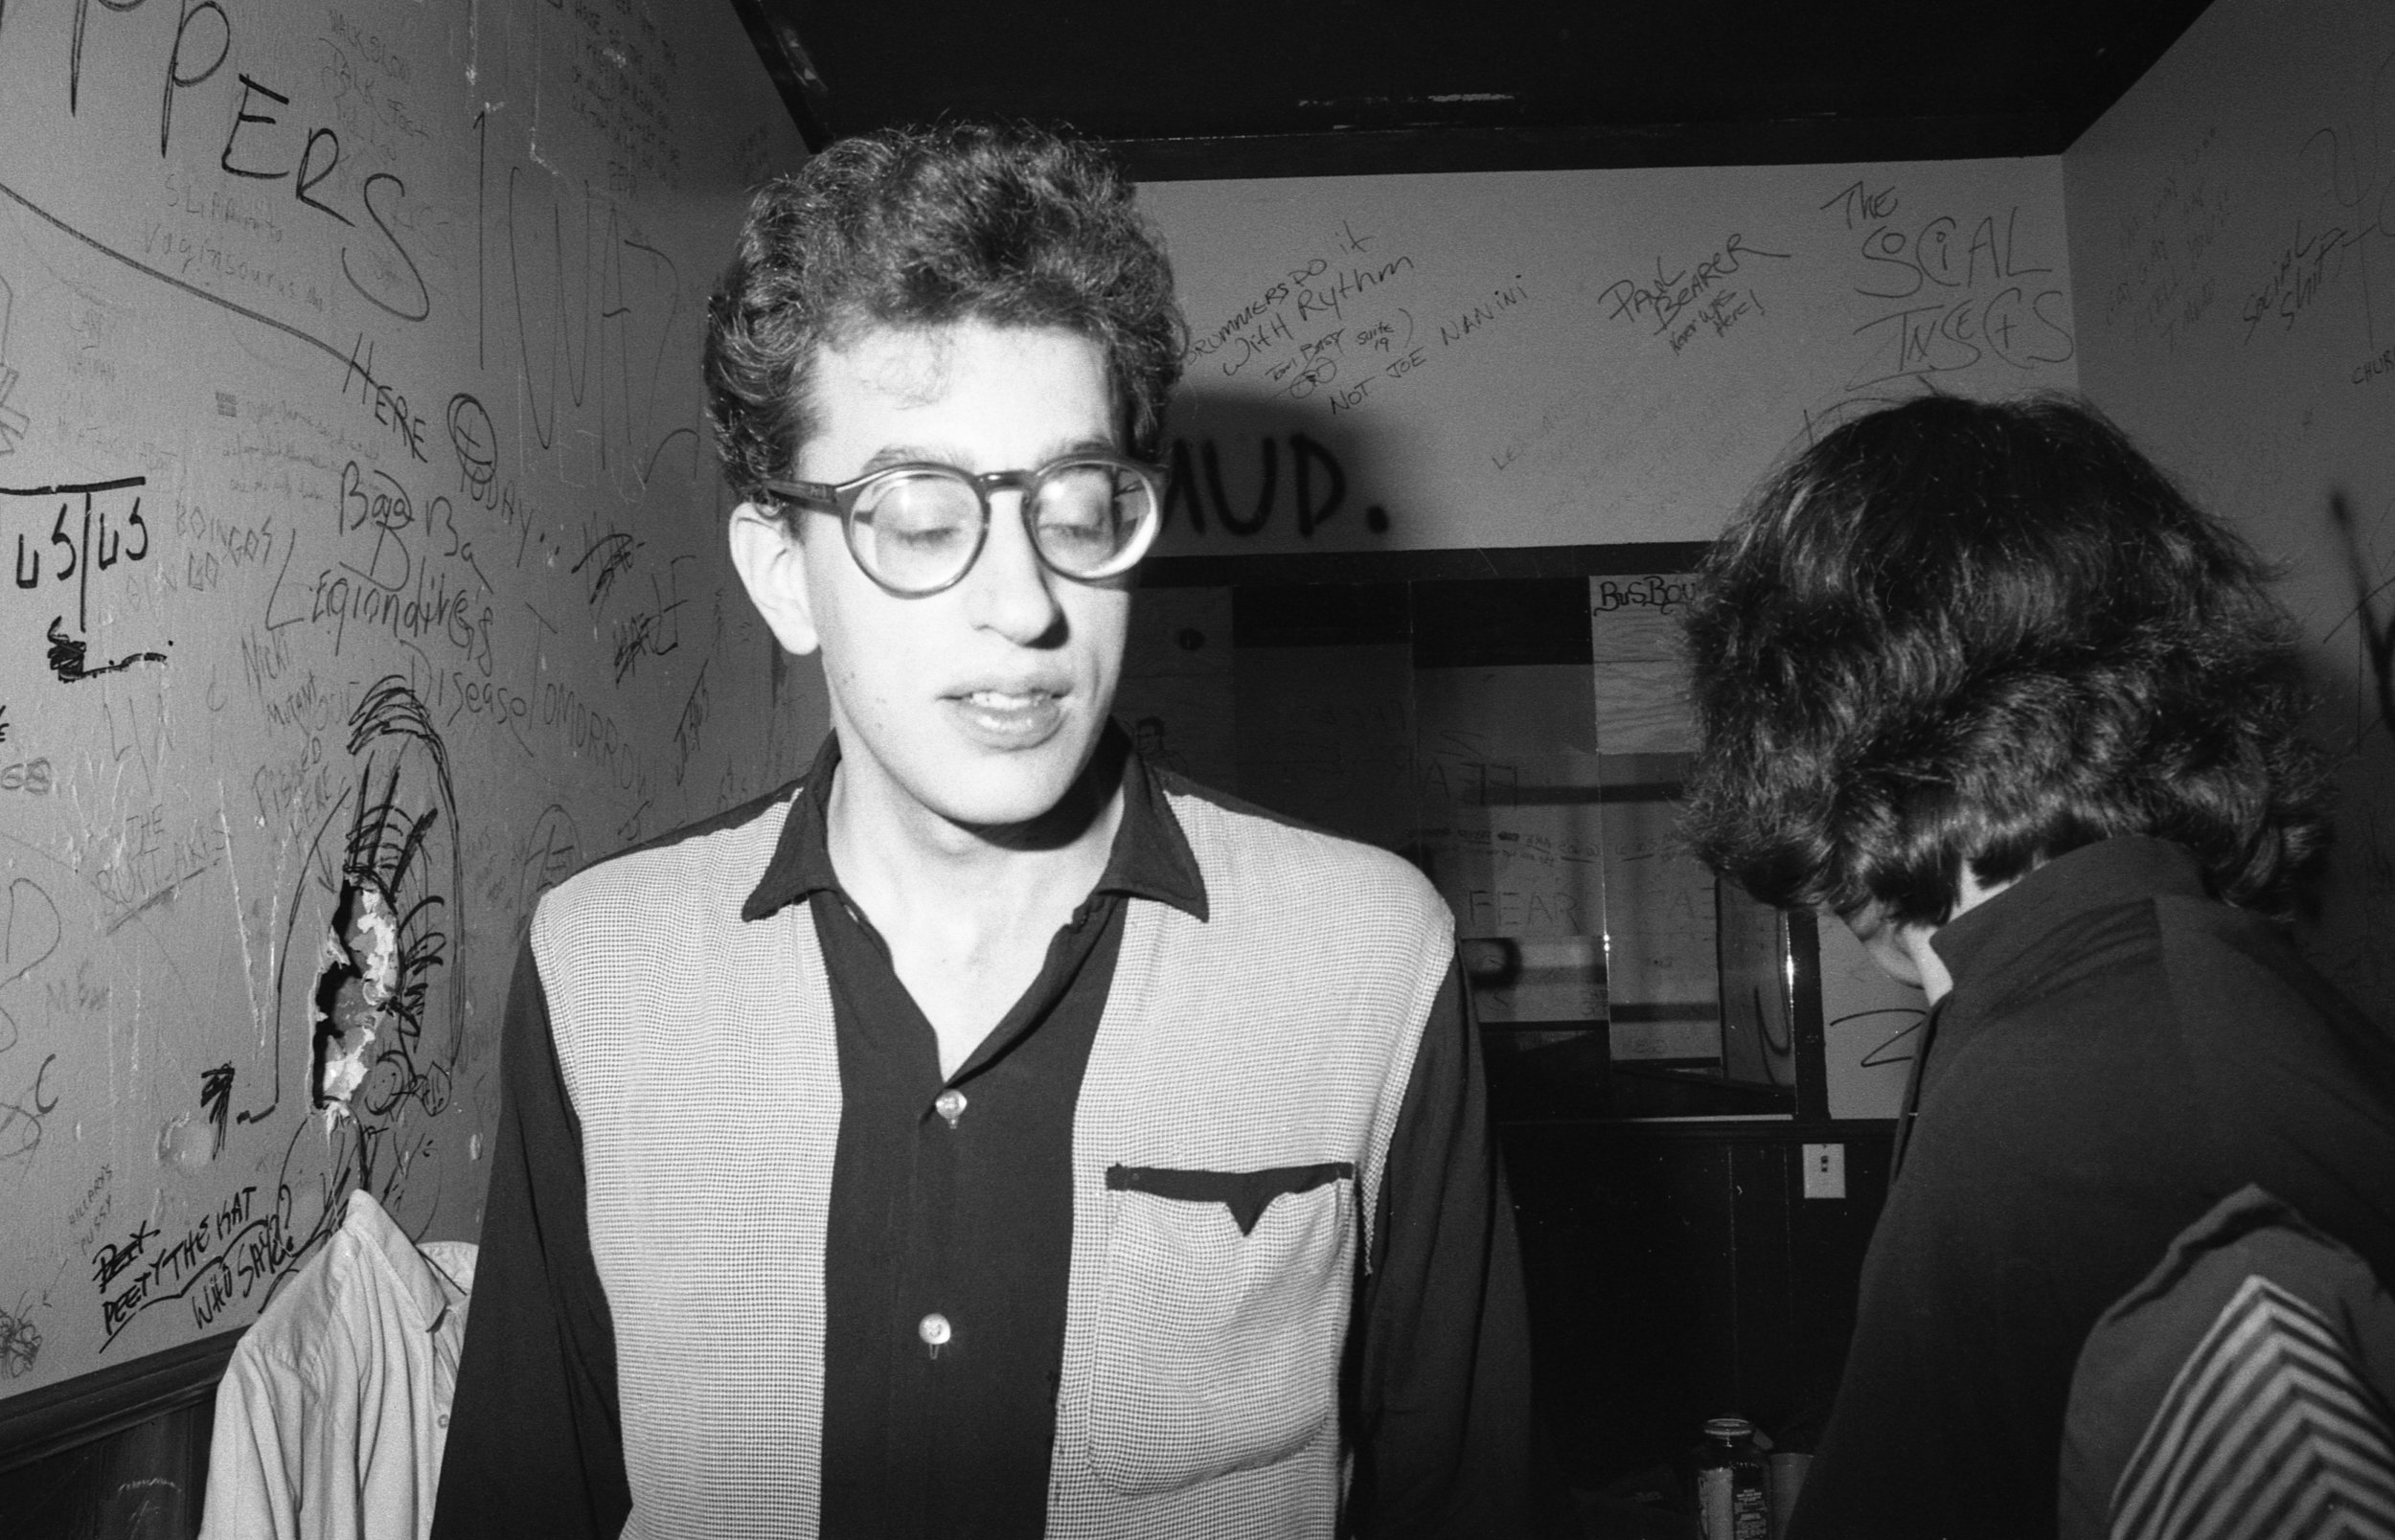 Los Angeles, ca. 1980. Backstage at the Whisky. A member of the band "No Sisters."